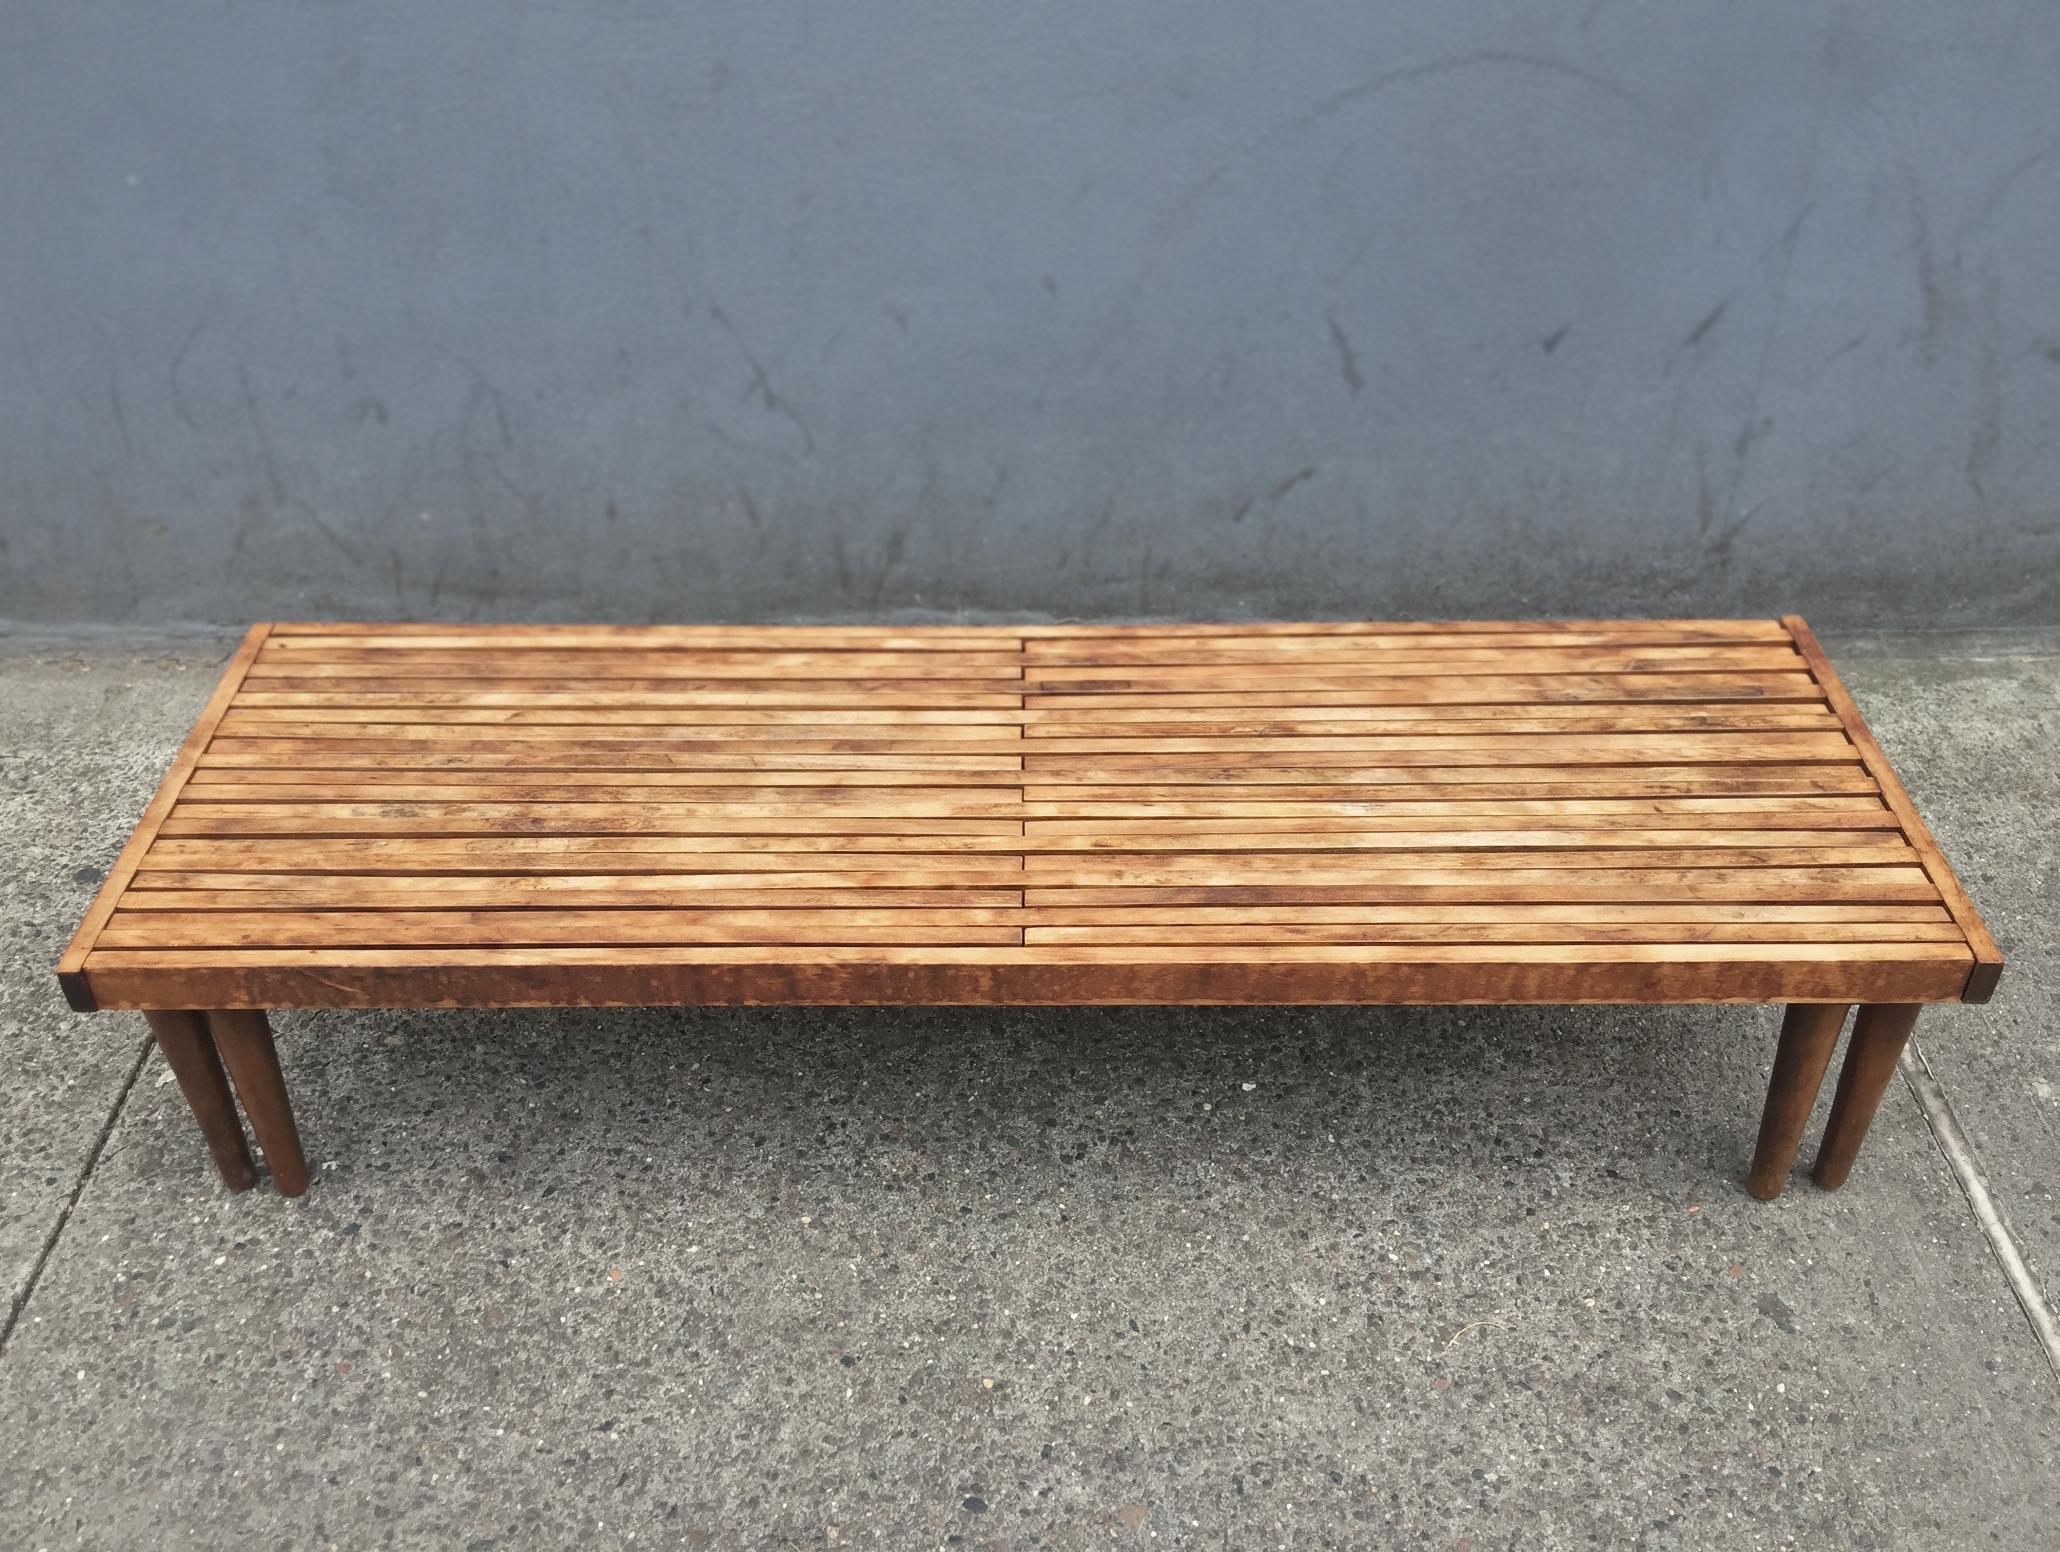 A handsome honey-toned slatted bench designed by John Keal for Brown Saltman in the 1960s. It is comprised of solid wood and reinforced by steel on the underside. The design of the bench allows for the slats to interlock and extend outward on either